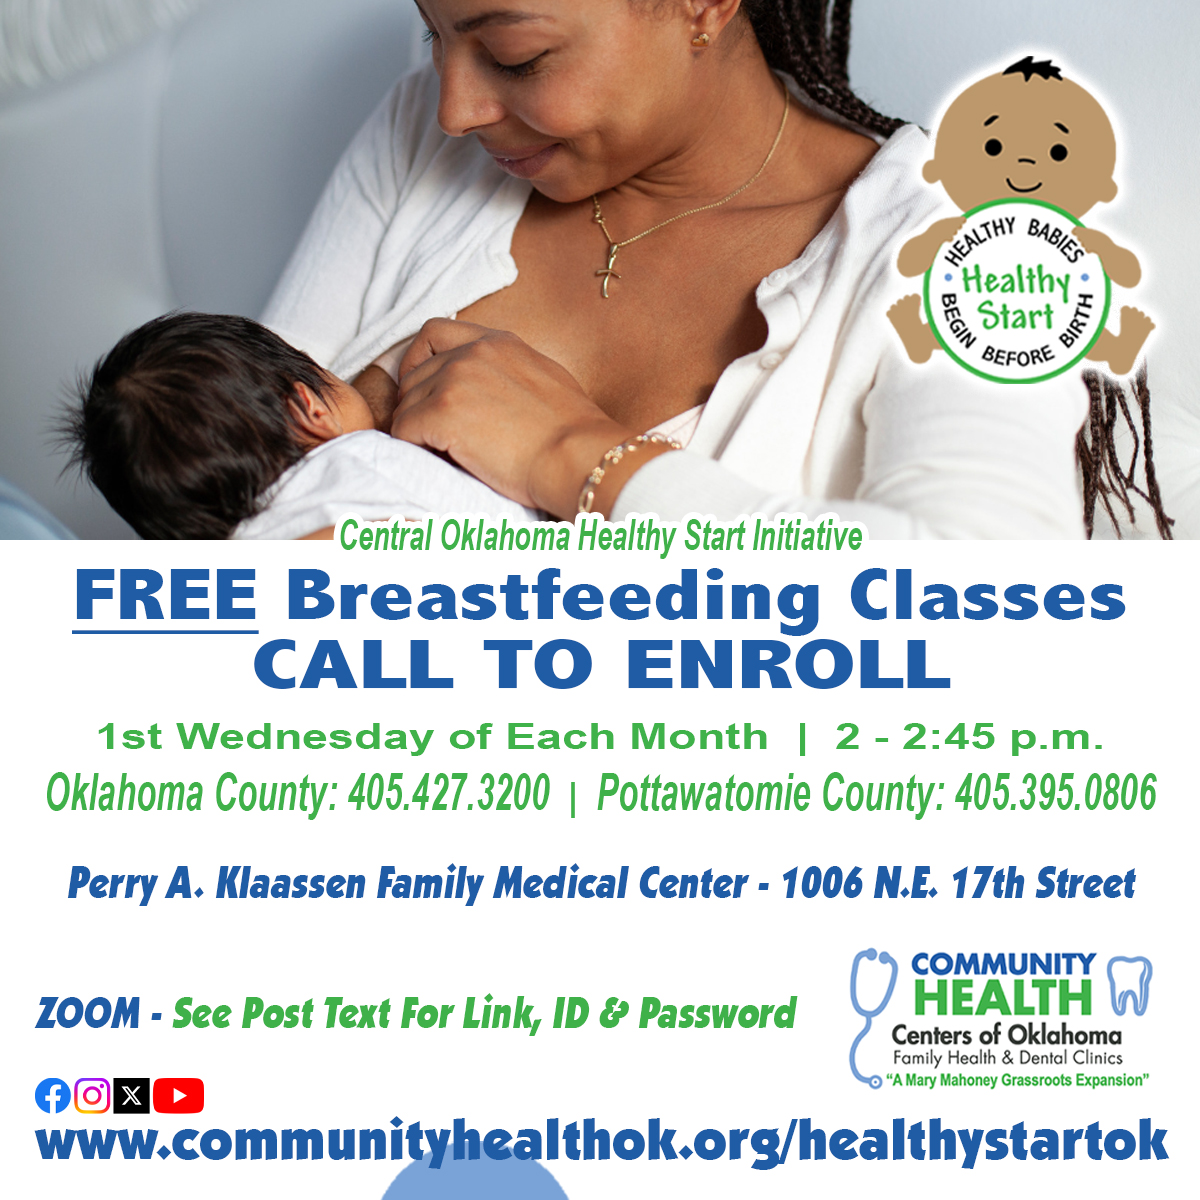 FREE BREASTFEEDING CLASS
First Wed. of each month - 2 - 2:45

IN PERSON: Perry A. Klaassen Family Medical Center 1006 N.E. 17th St. (3rd Floor)

VIA ZOOM: communityhealthok.zoom.us/j/89644352669?…
Meeting ID: 896 4435 2669
Password: 282116

#breastfeeding #healthystart